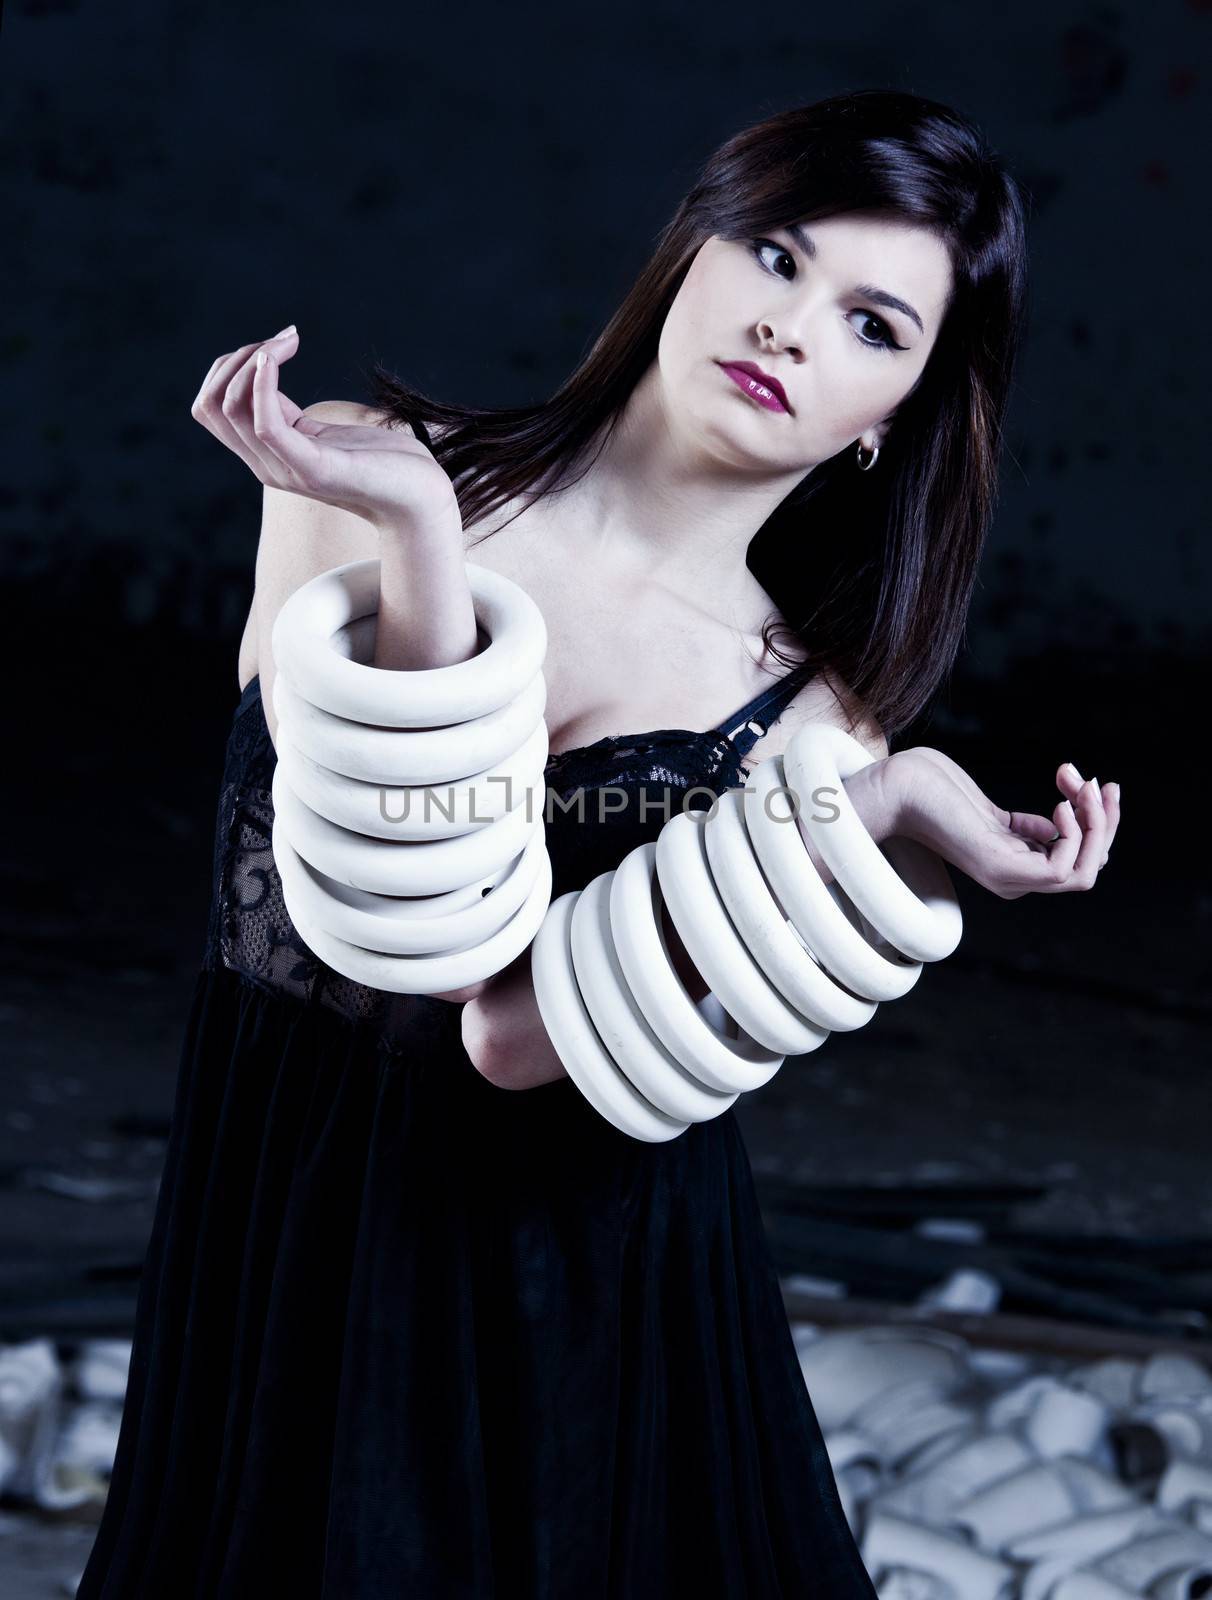 Fashion photoshoot with  a beautifulyoung woman holding pieces of porcelain